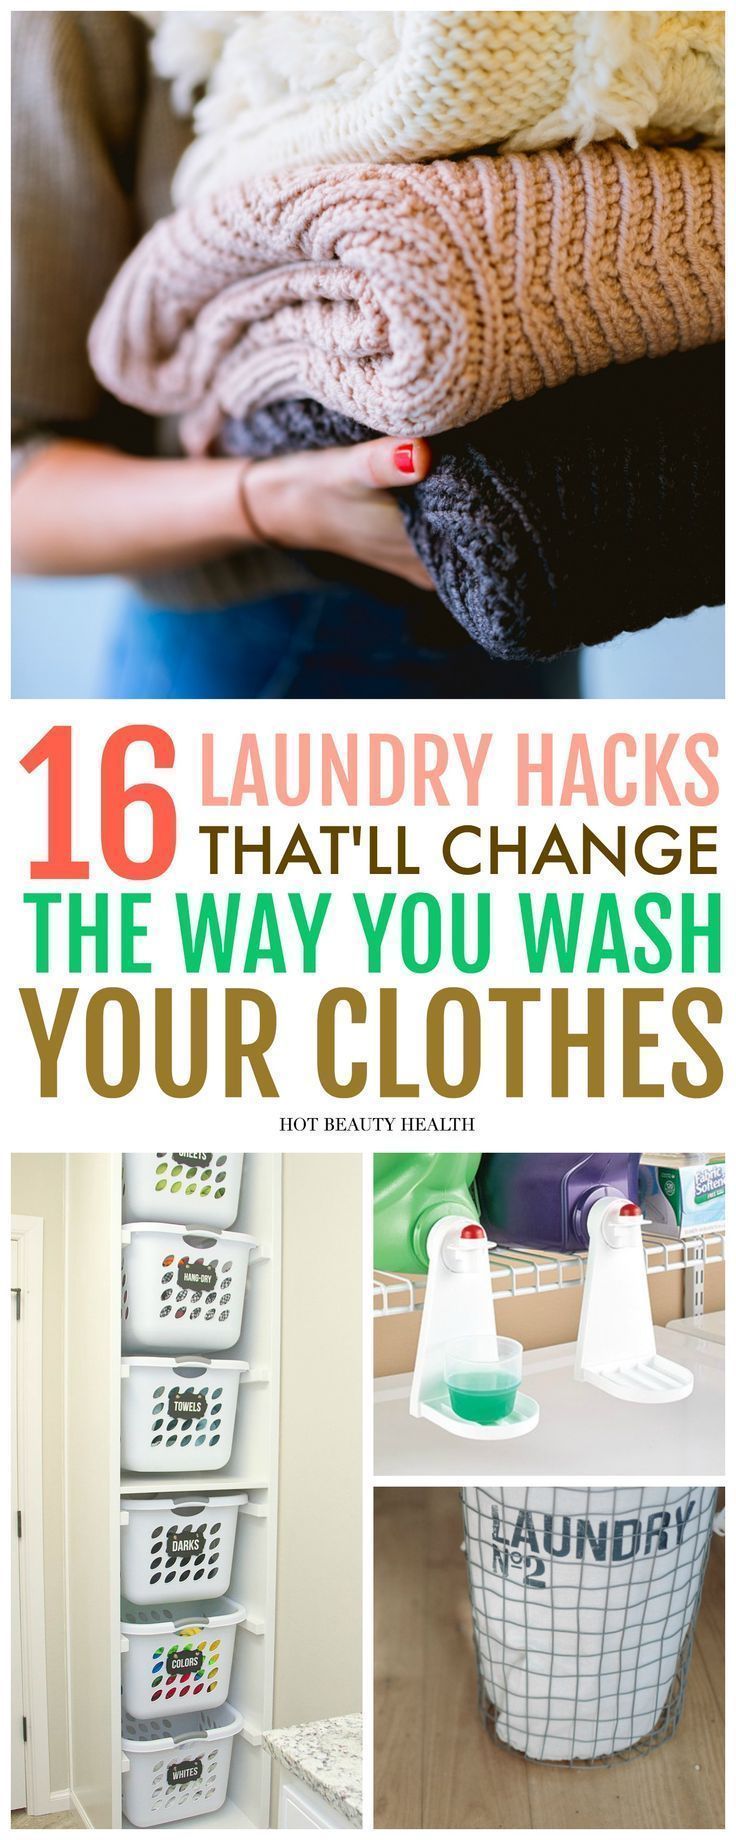 16 Laundry Hacks That Will Change The Way You Wash Clothes -   17 DIY Clothes Organizer cleaning ideas